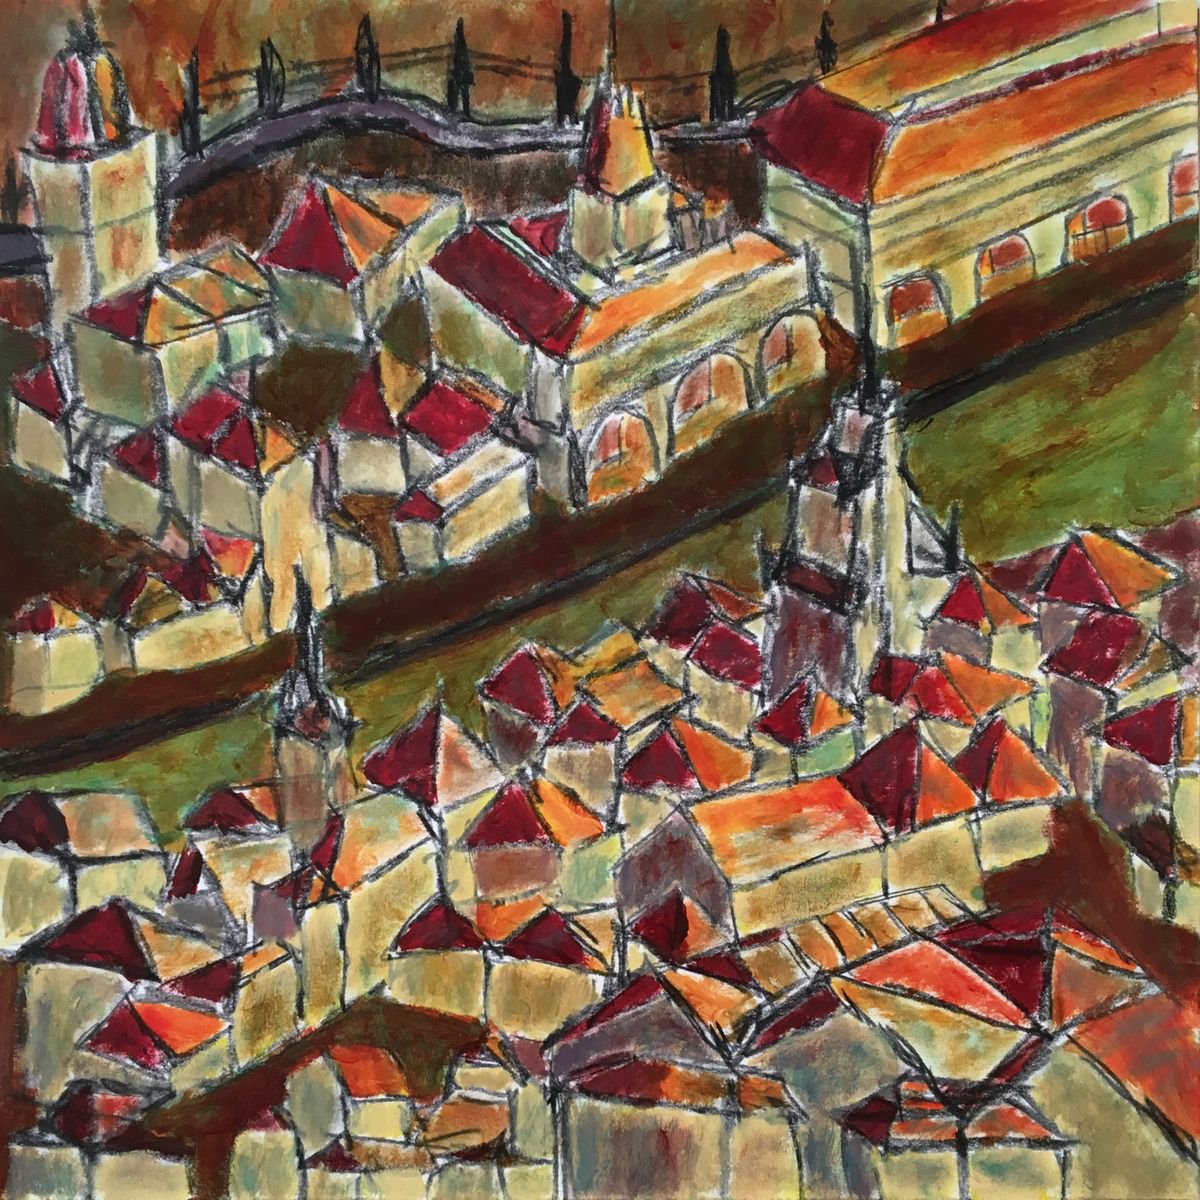 Town V (30x30) by Paola Consonni